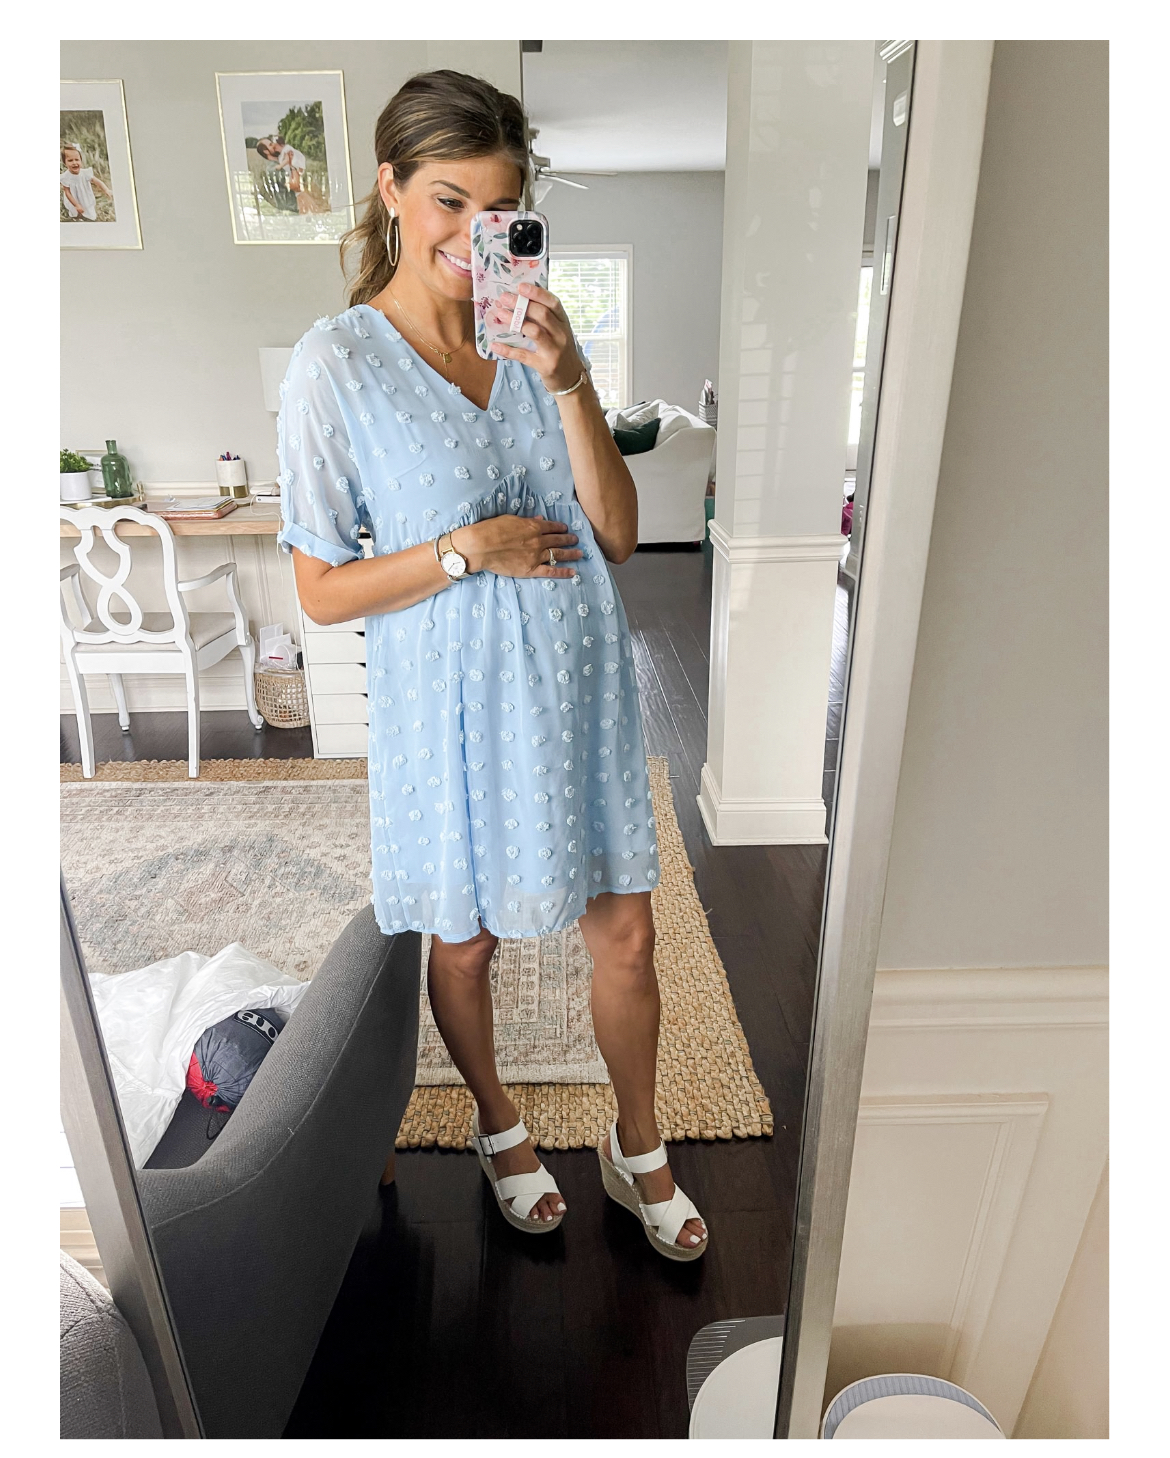 amazon dress that works great for maternity